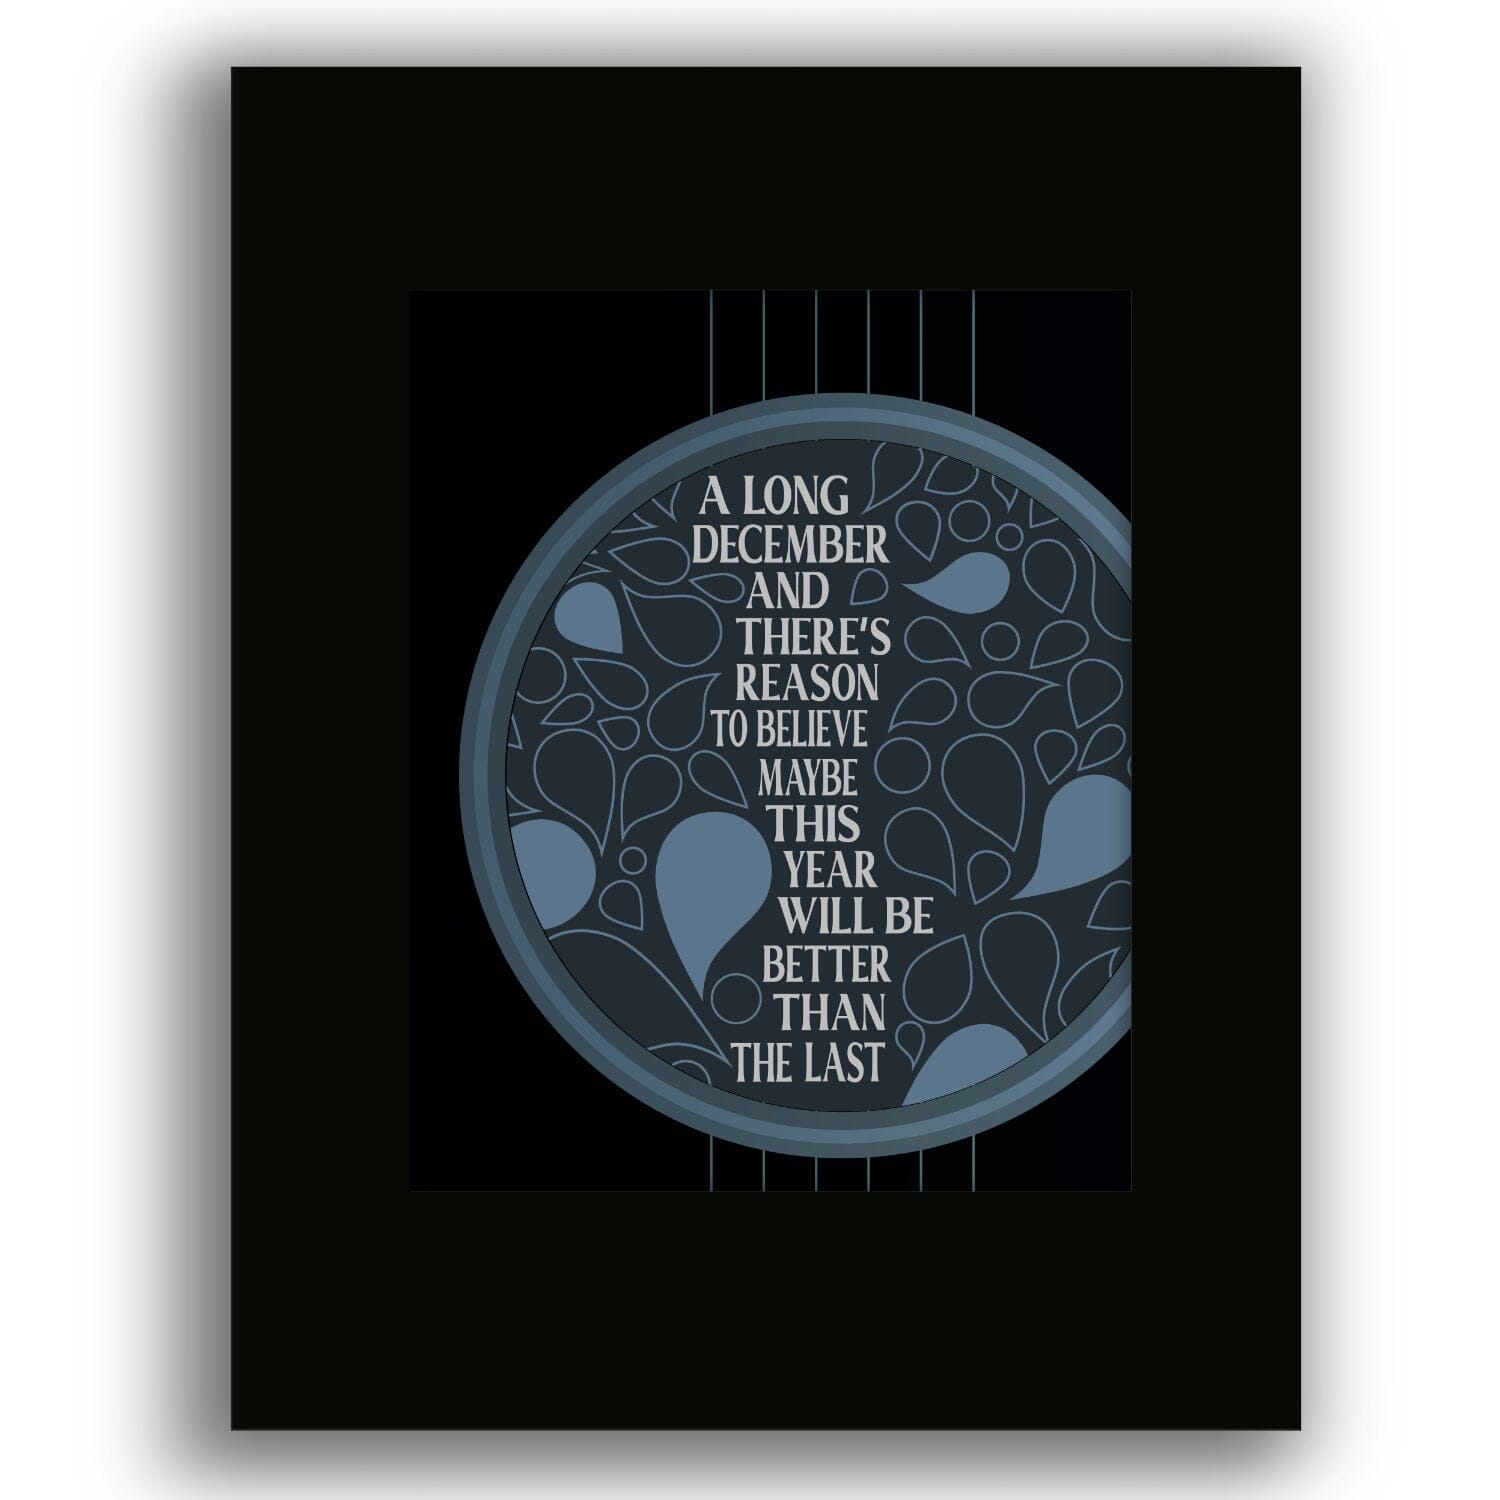 A Long December by the Counting Crows - Song Lyric Print Song Lyrics Art Song Lyrics Art 8x10 Black Matted Unframed Print 